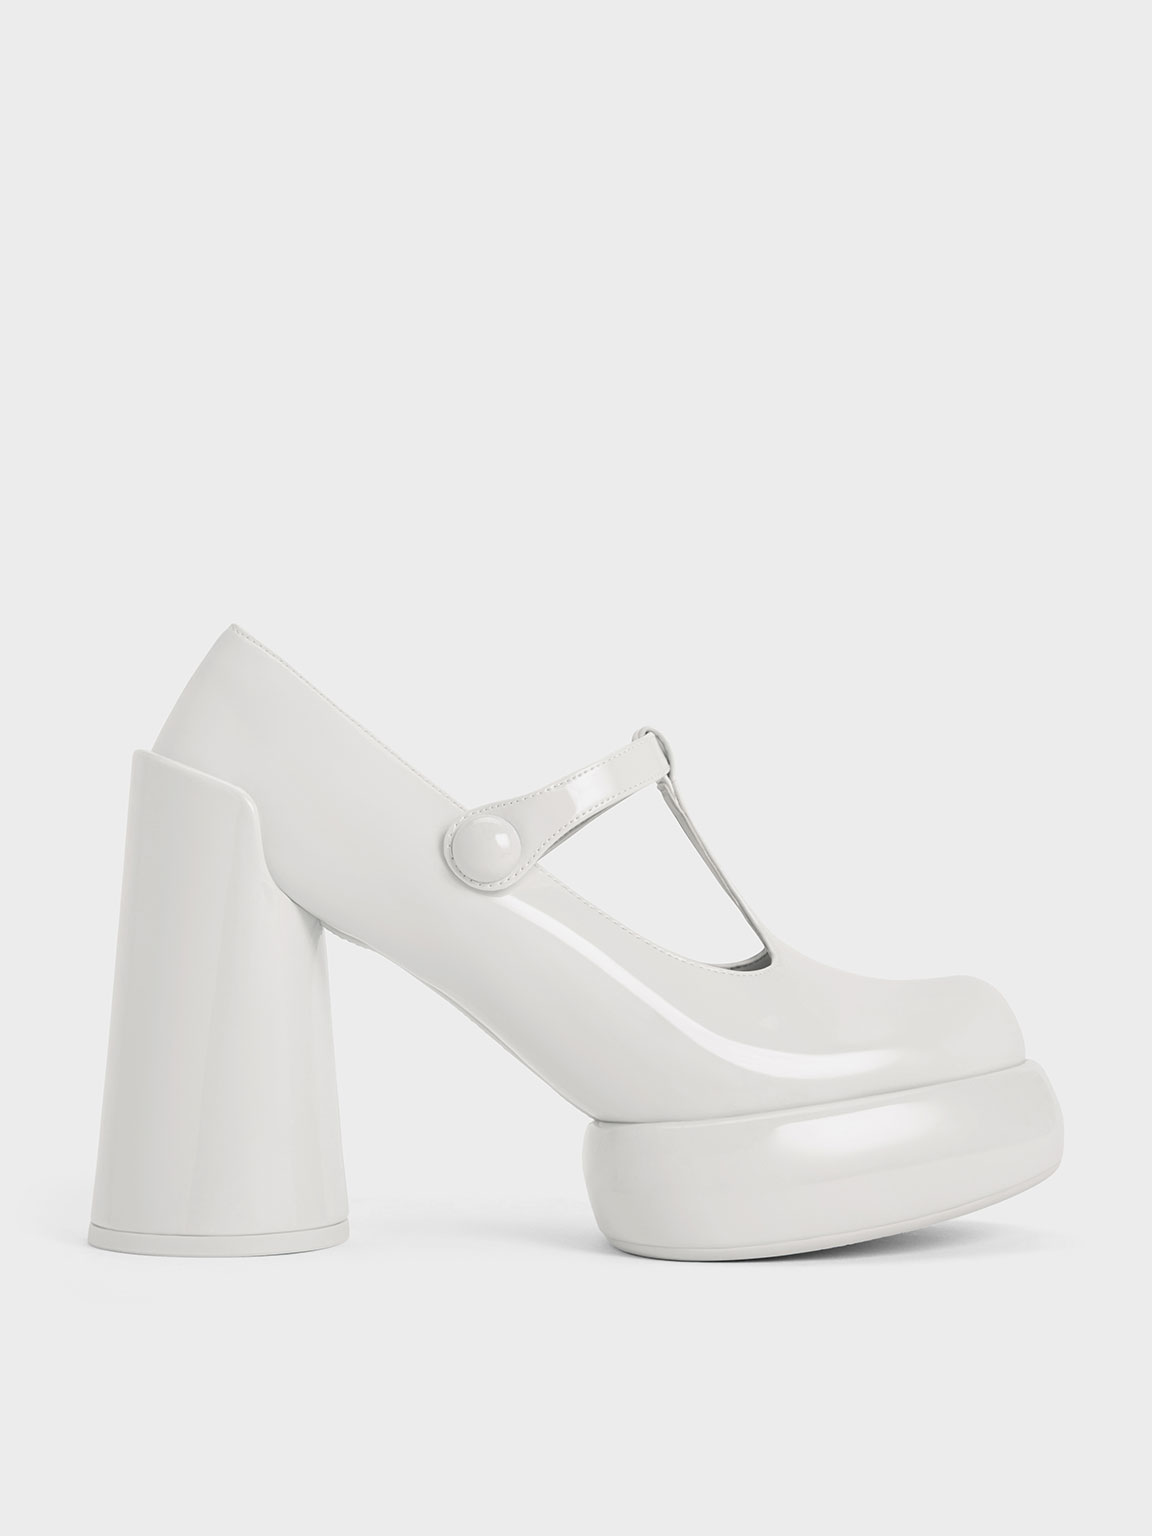 Charles & Keith Darcy Patent T-bar Platform Mary Janes In White